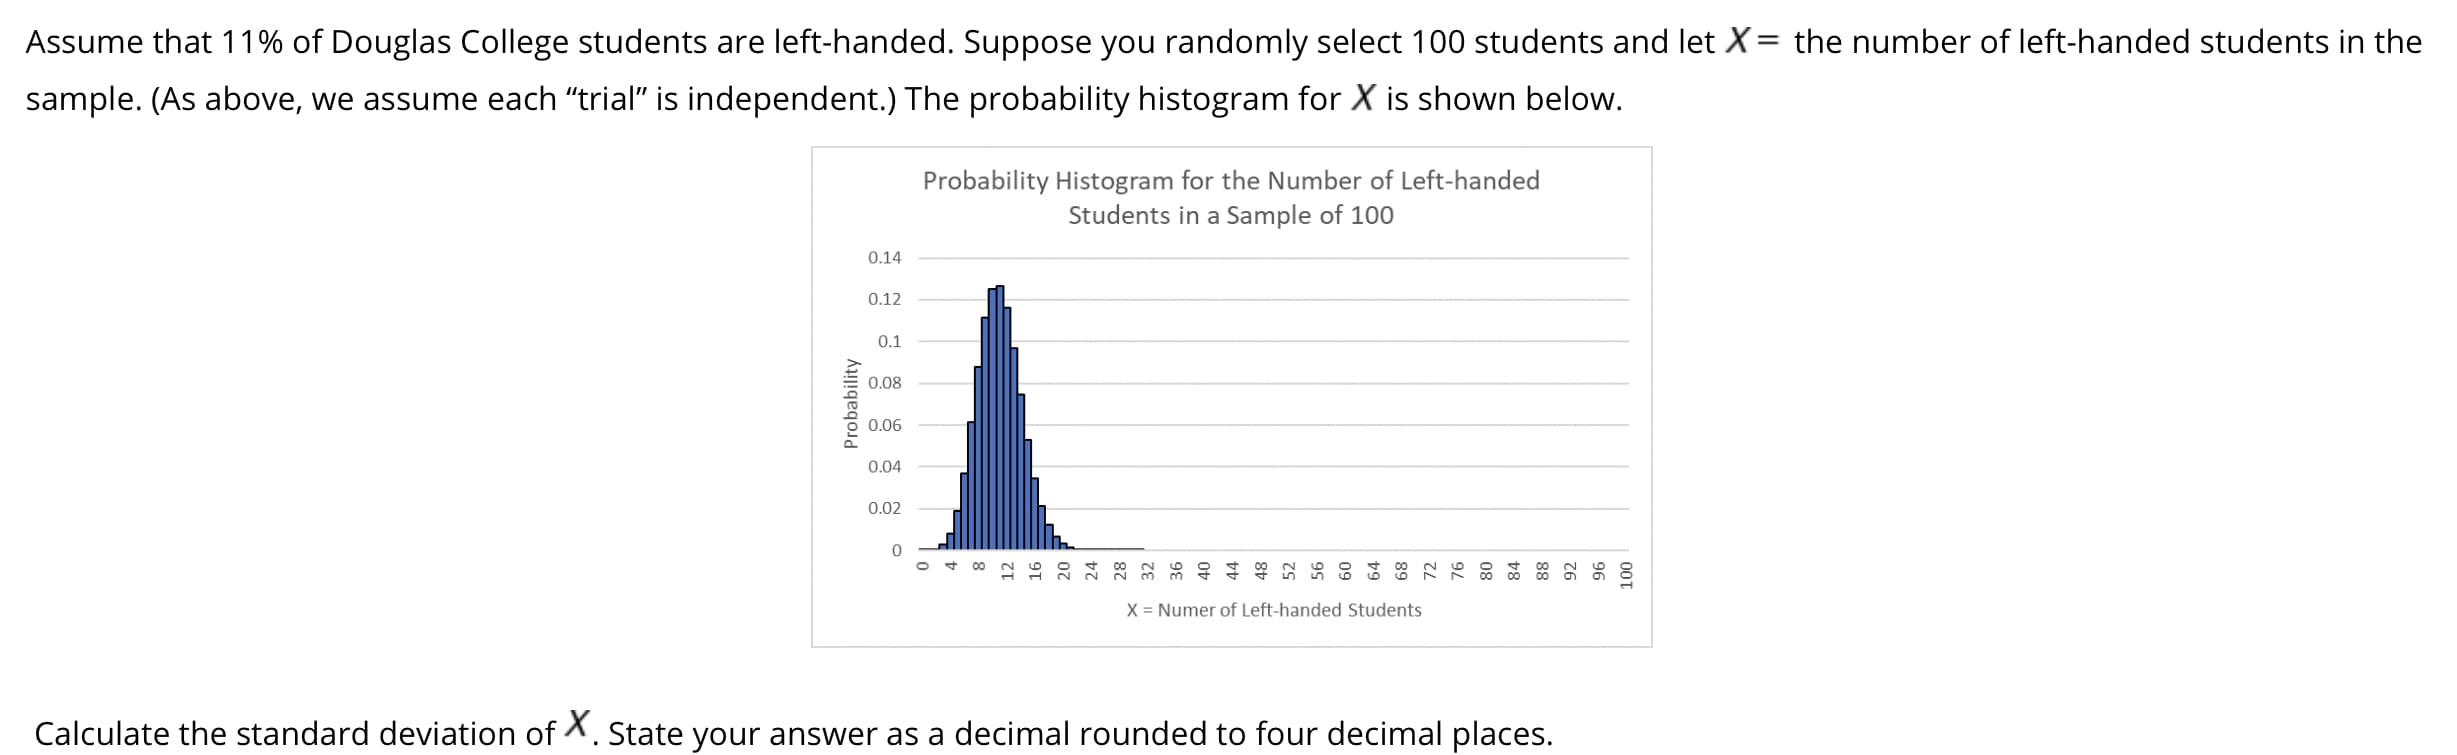 Assume that 11% of Douglas College students are left-handed. Suppose you randomly select 100 students and let X= the number of left-handed students in the
sample. (As above, we assume each "trial" is independent.) The probability histogram for X is shown below.
Probability Histogram for the Number of Left-handed
Students in a Sample of 100
0.14
0.12
0.1
0.08
0.06
0.04
0.02
X = Numer of Left-handed Students
Calculate the standard deviation of . State your answer as a decimal rounded to four decimal places.
00T
96
76
88
08
72
12
Probability
